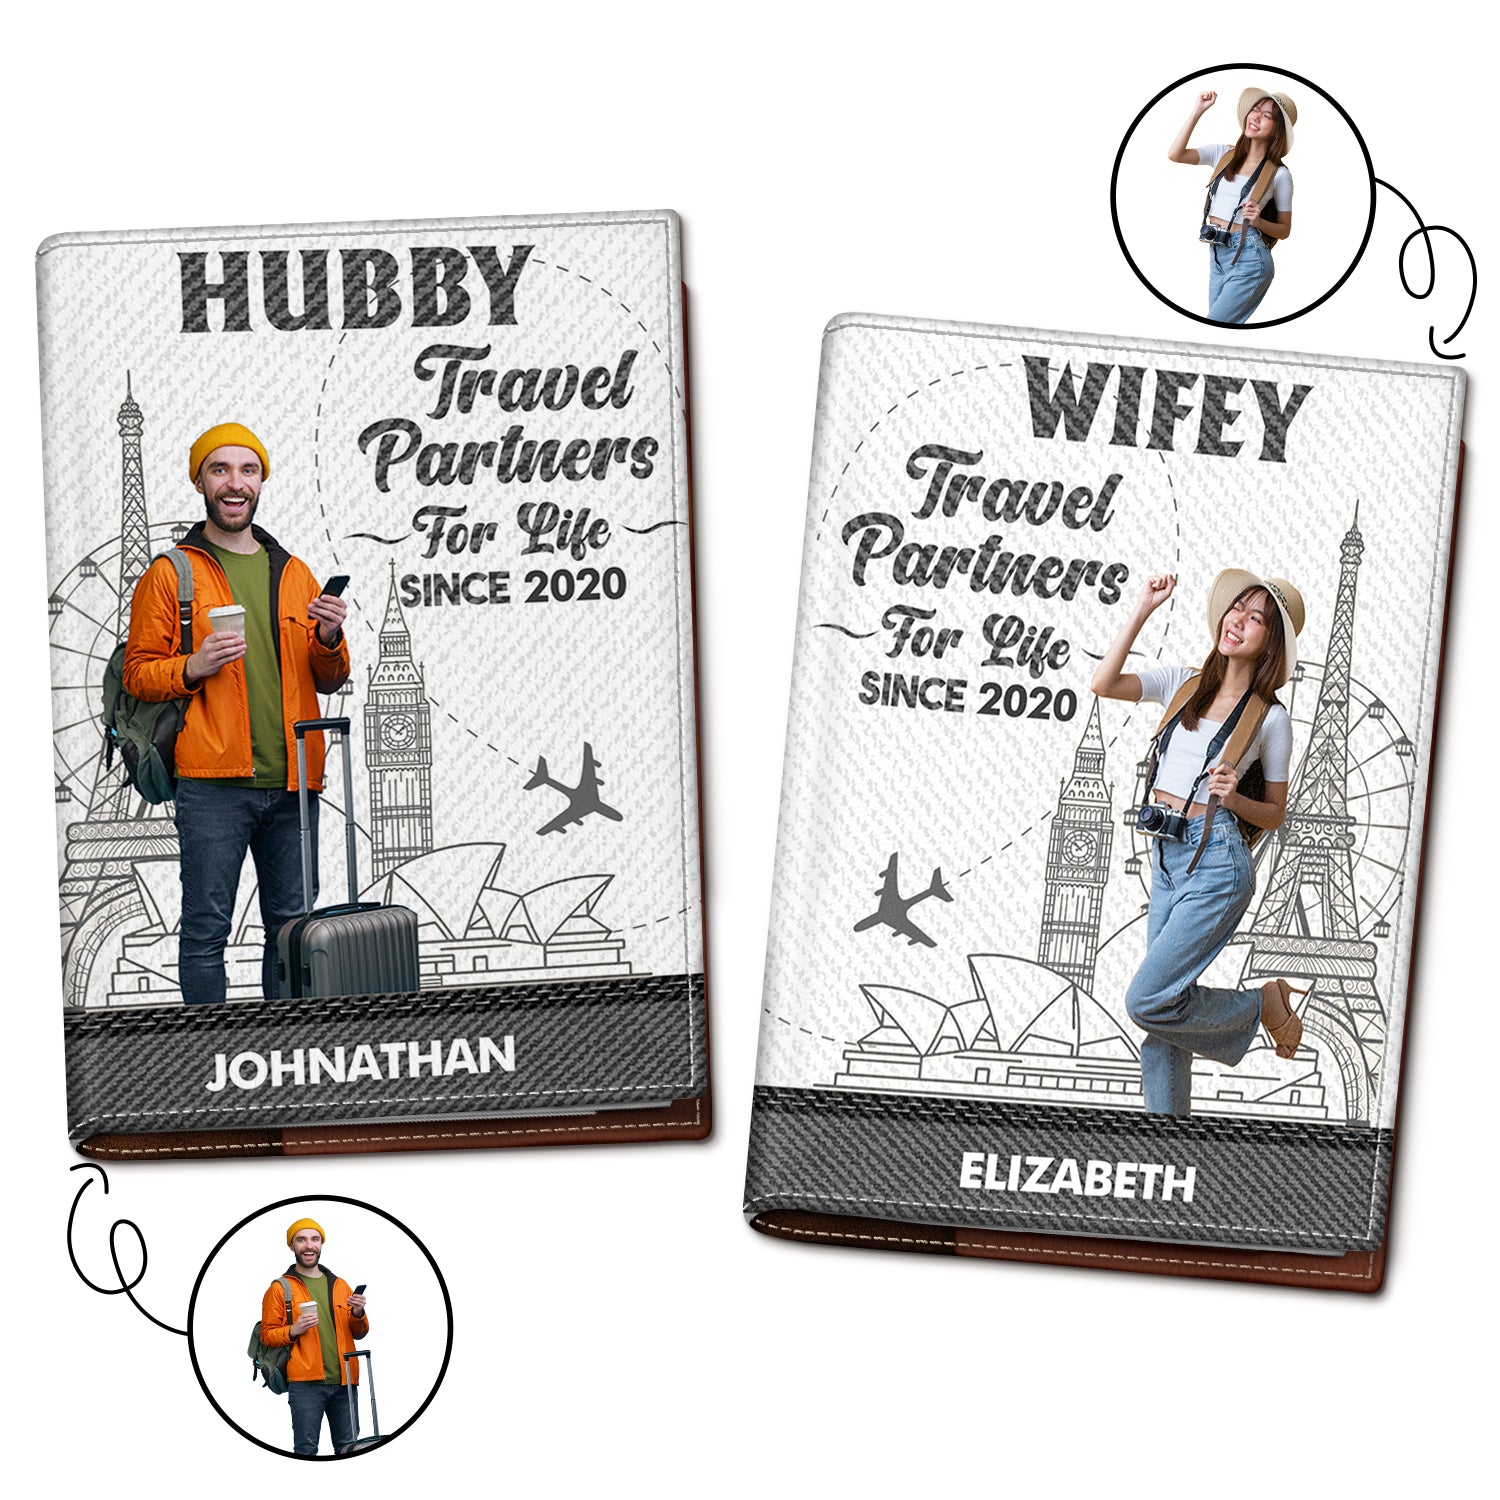 Custom Photo Traveling Couple Travel Partners For Life - Gift For Couples, Traveling Gift - Personalized Passport Cover, Passport Holder